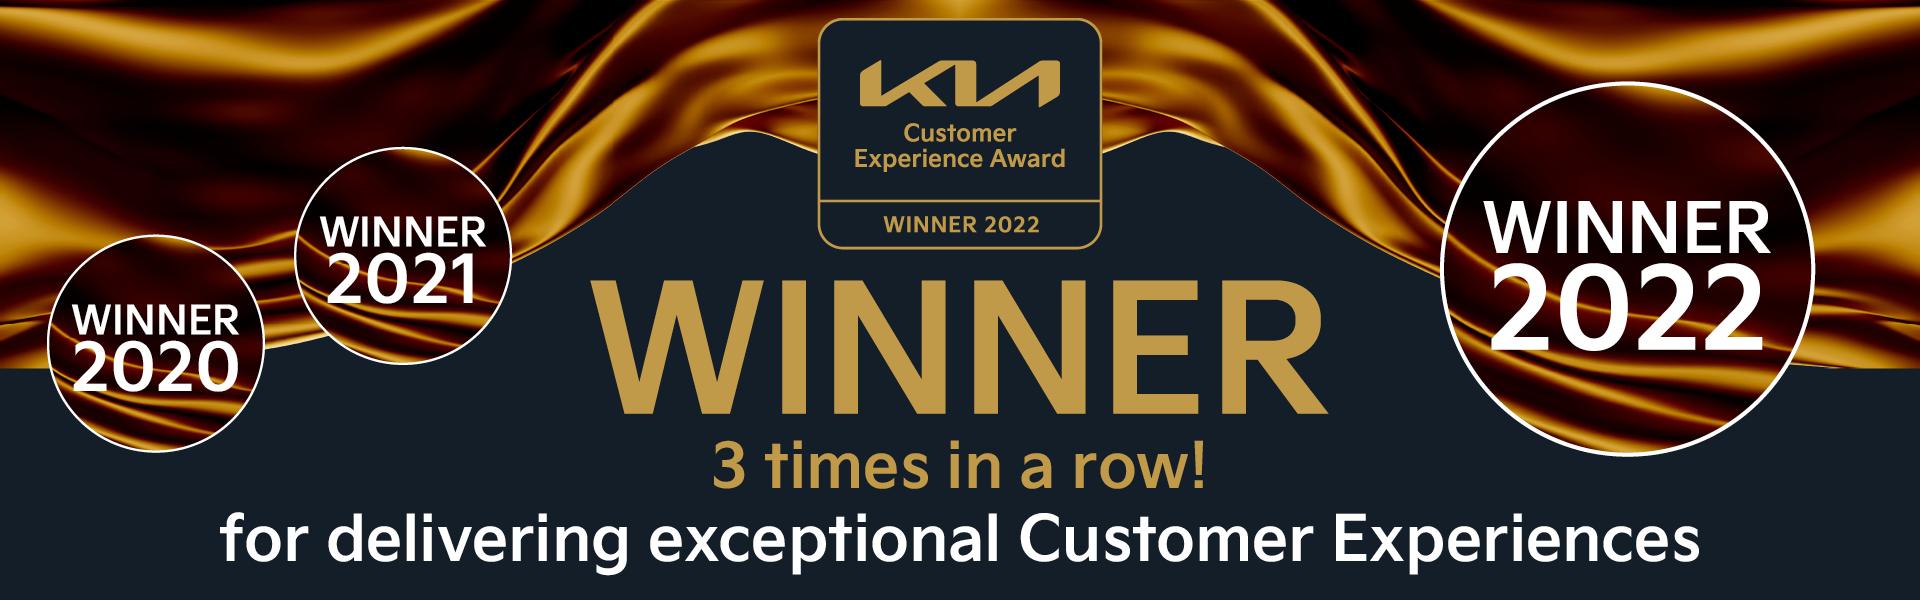 3 times in a row winner of Kia Customer Experience Award for delivering exceptional Customer Experience